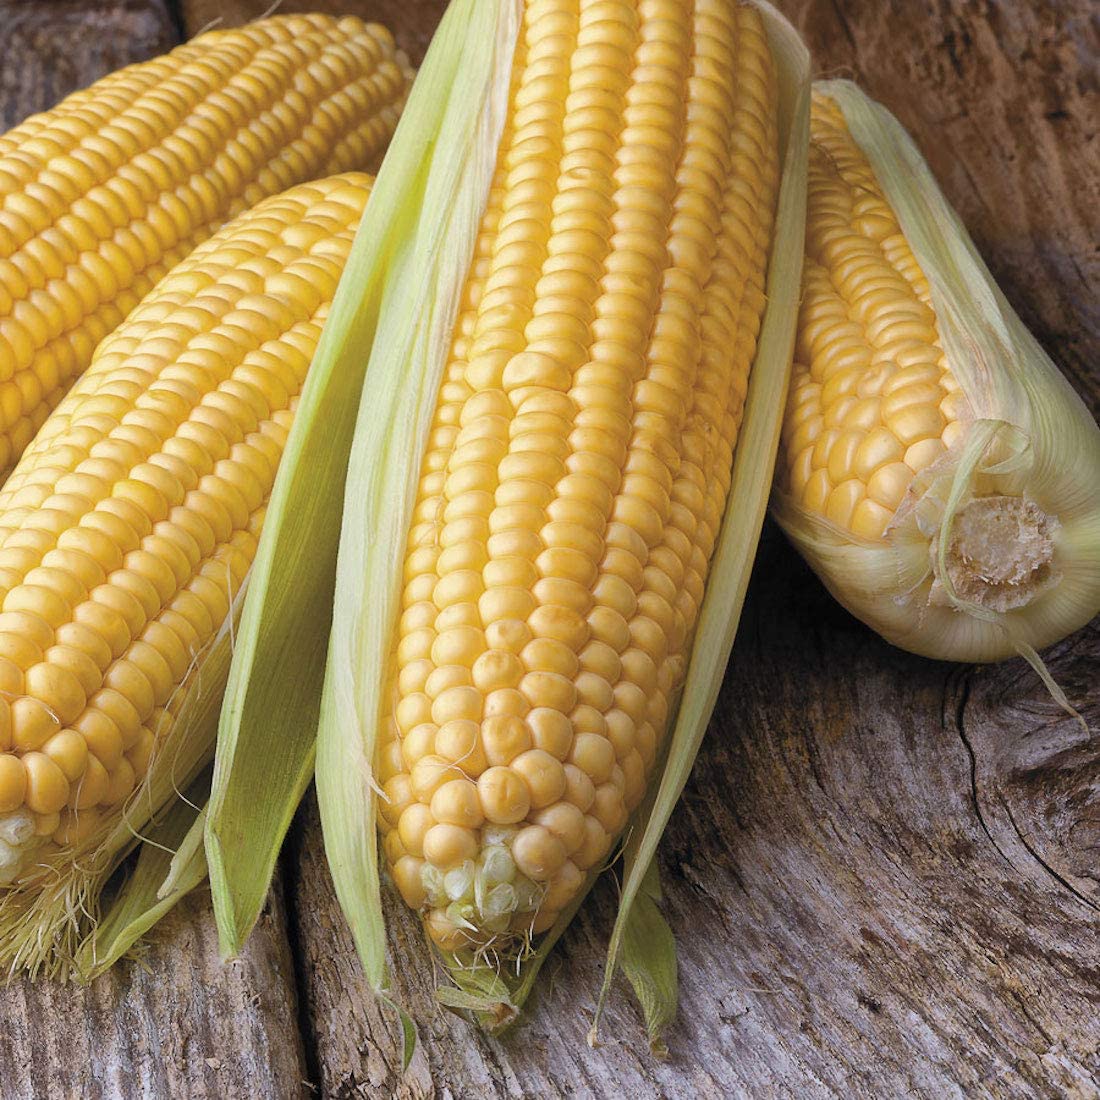 Honey Select Yellow Sweet Corn Seeds for Planting, 50+ Heirloom Seeds Per Packet, Non GMO Seeds, Botanical Name: Zea Mays